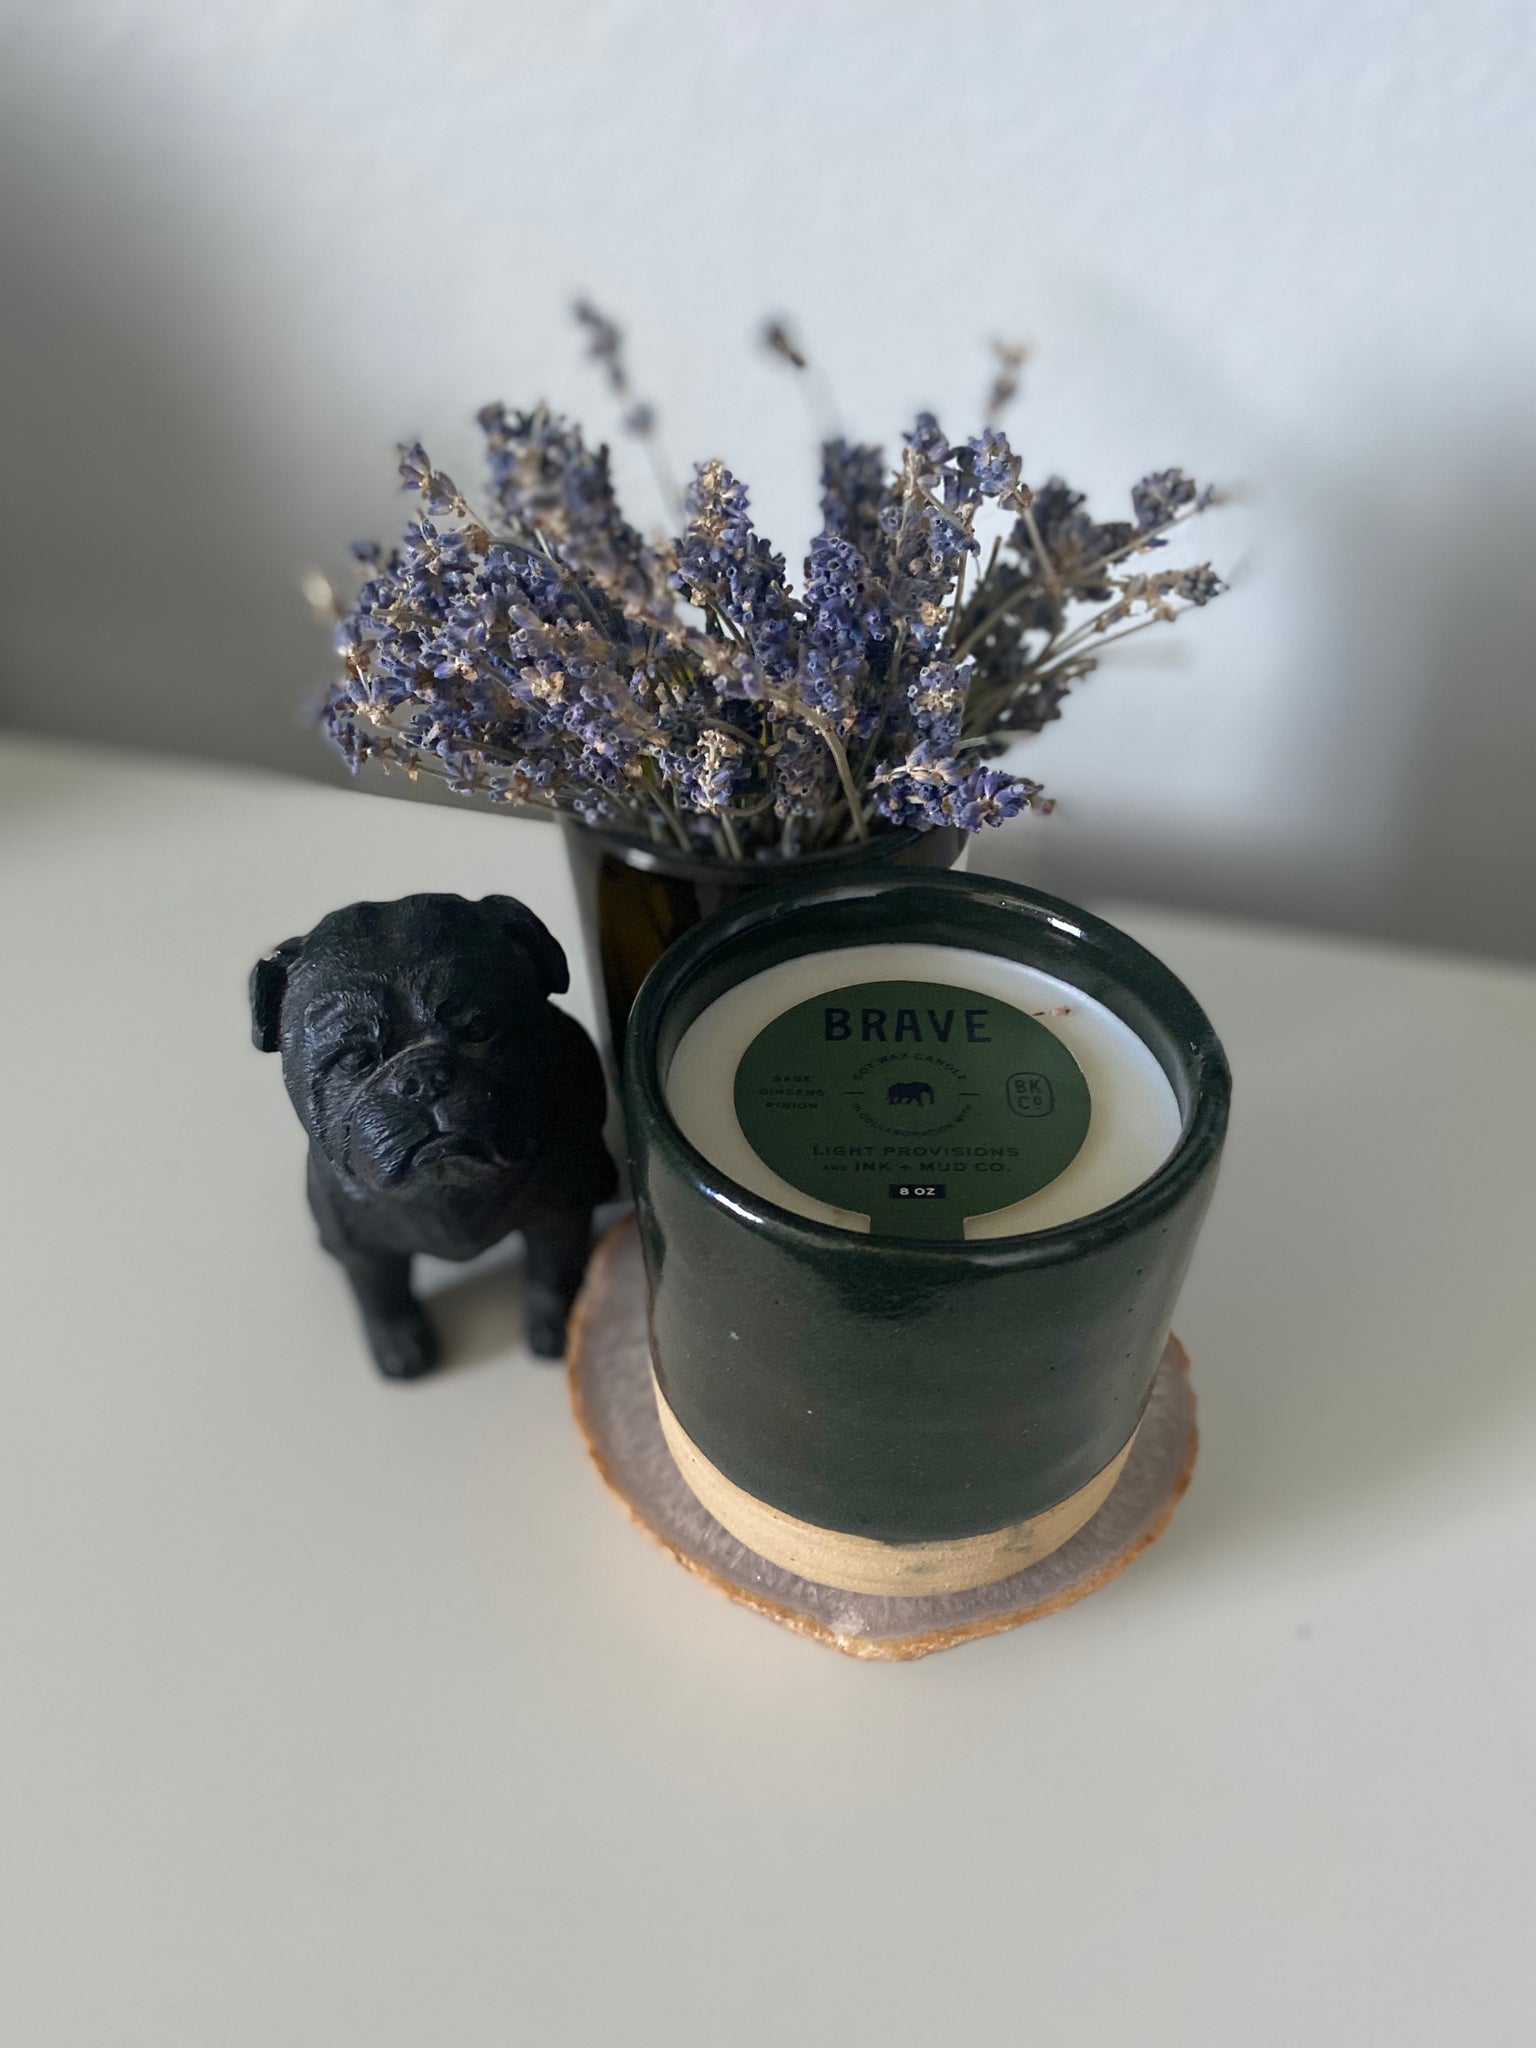 Brave + Kind Signature Candles - Hand Poured in Handcrafted, Reusable Tumblers